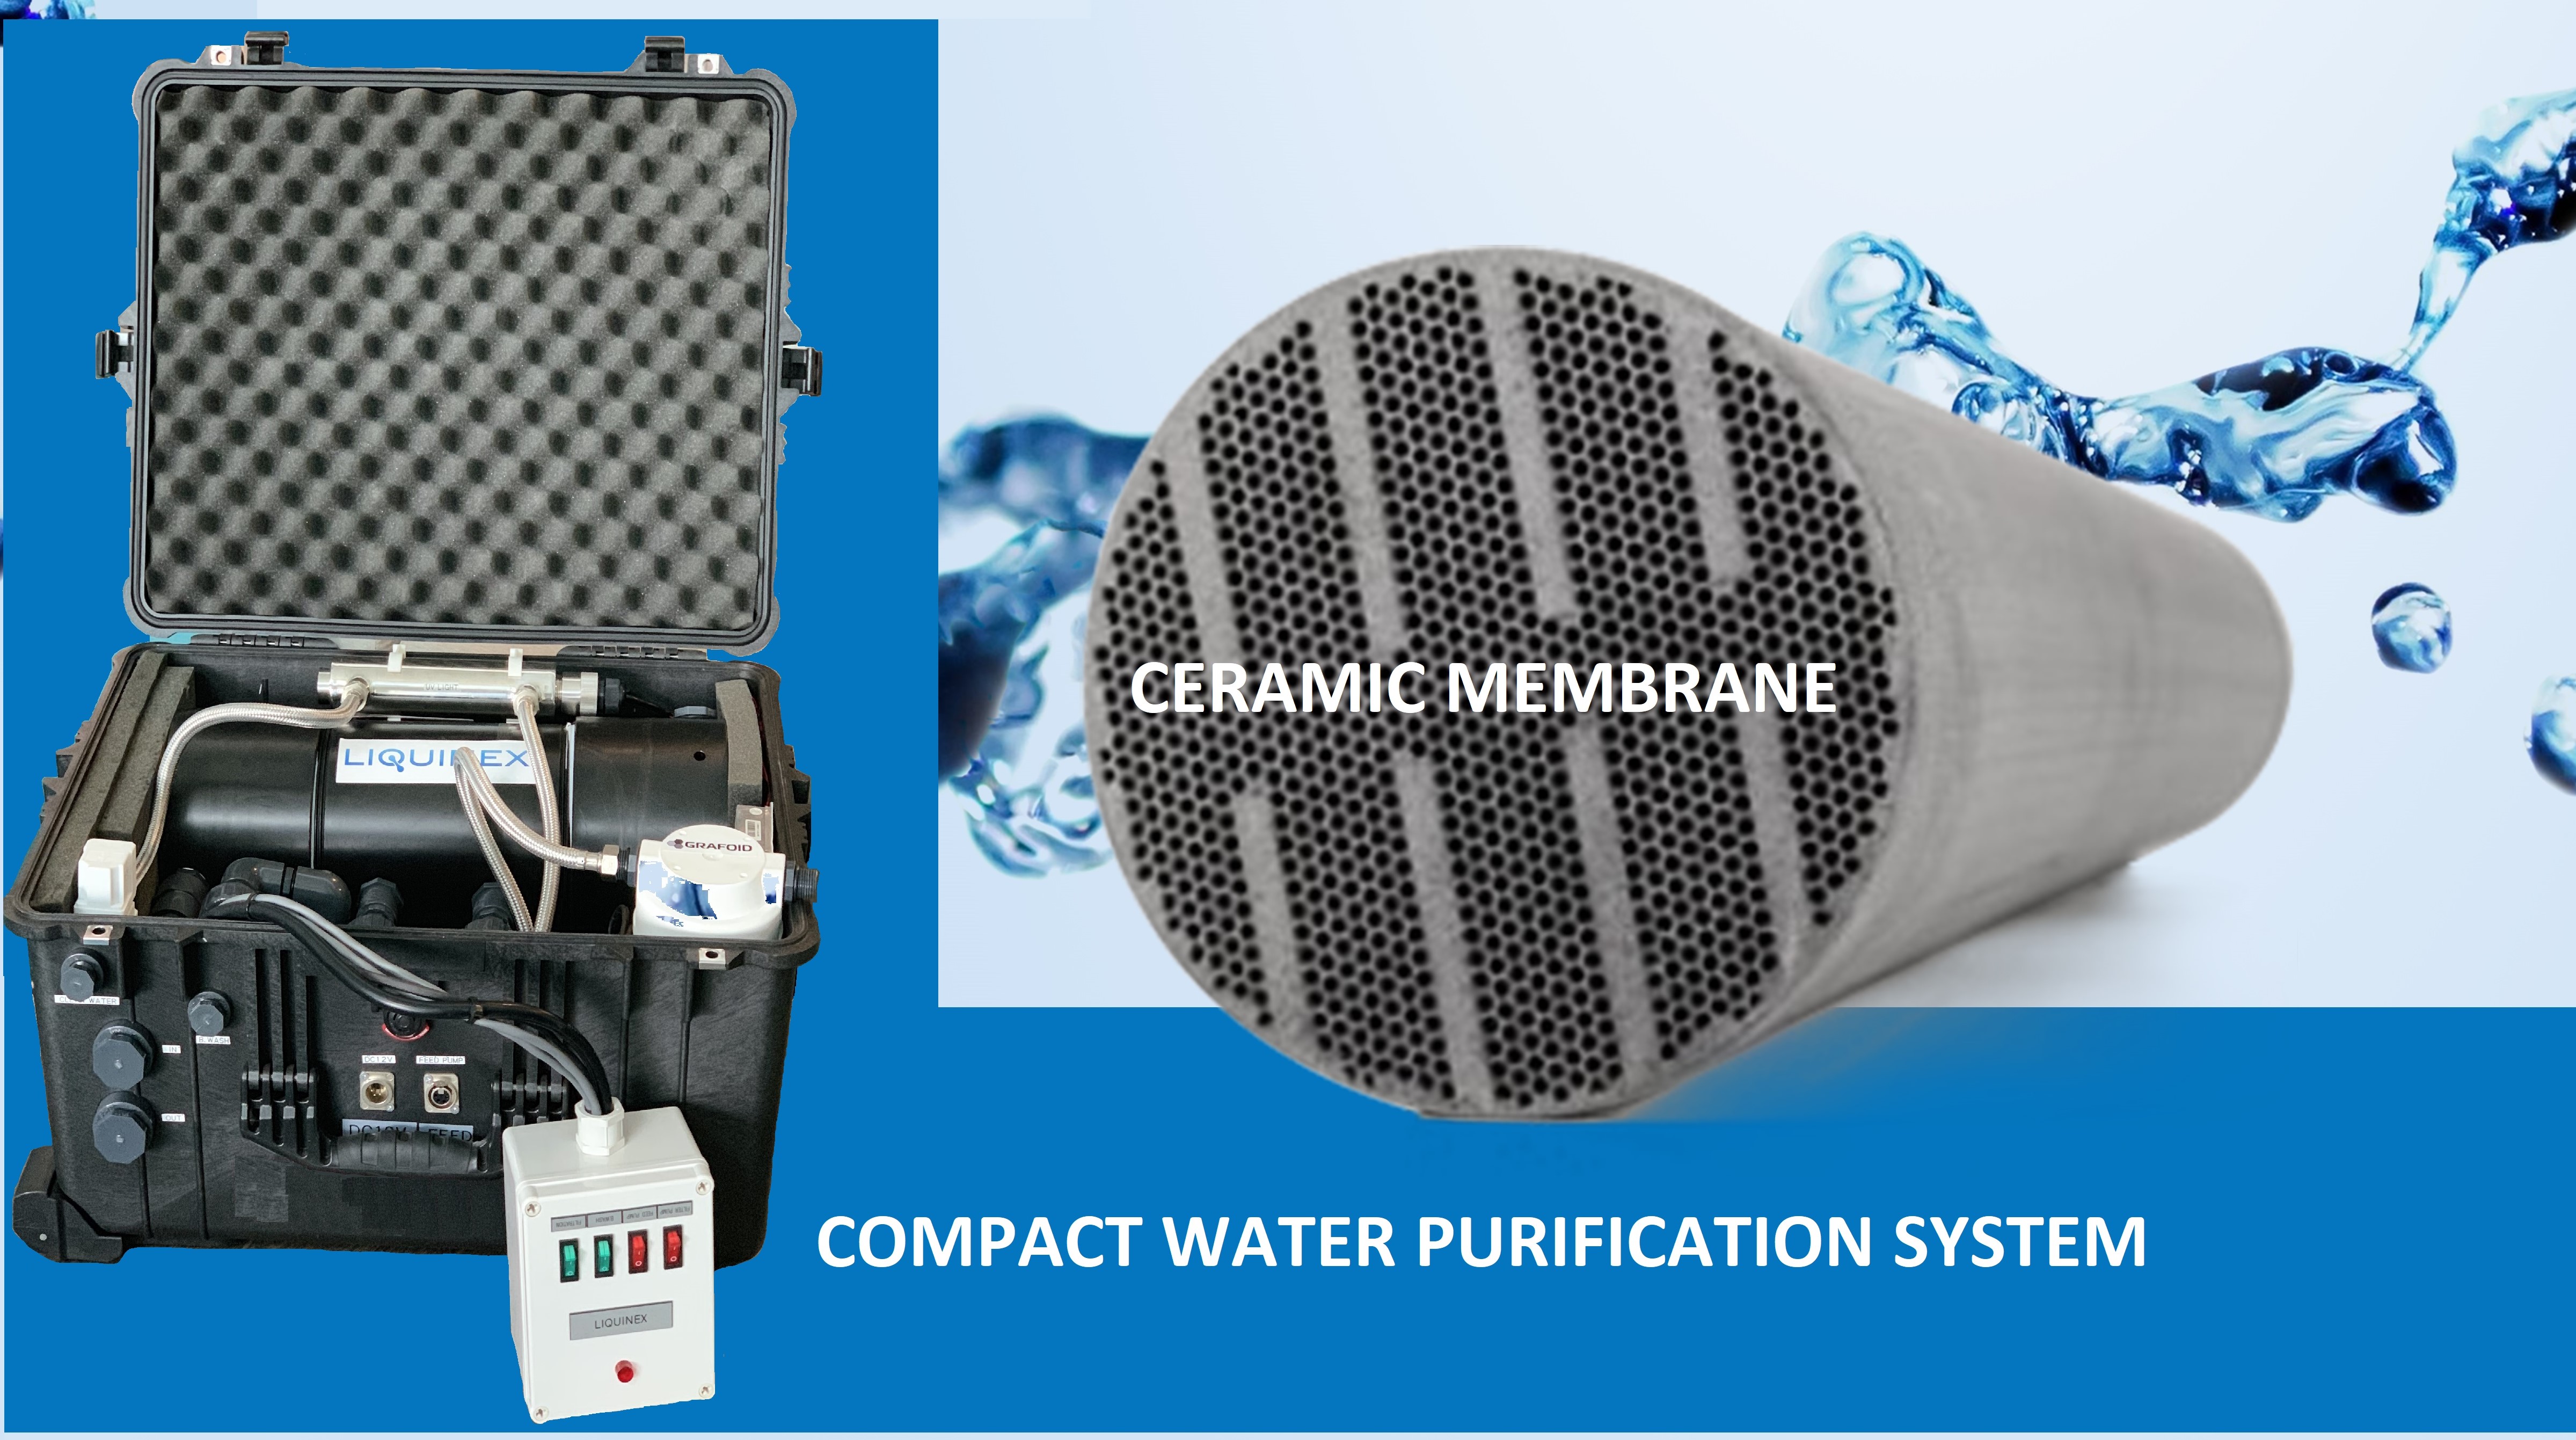 Liquinex's compact water purification system has won a global water award in Dubai.